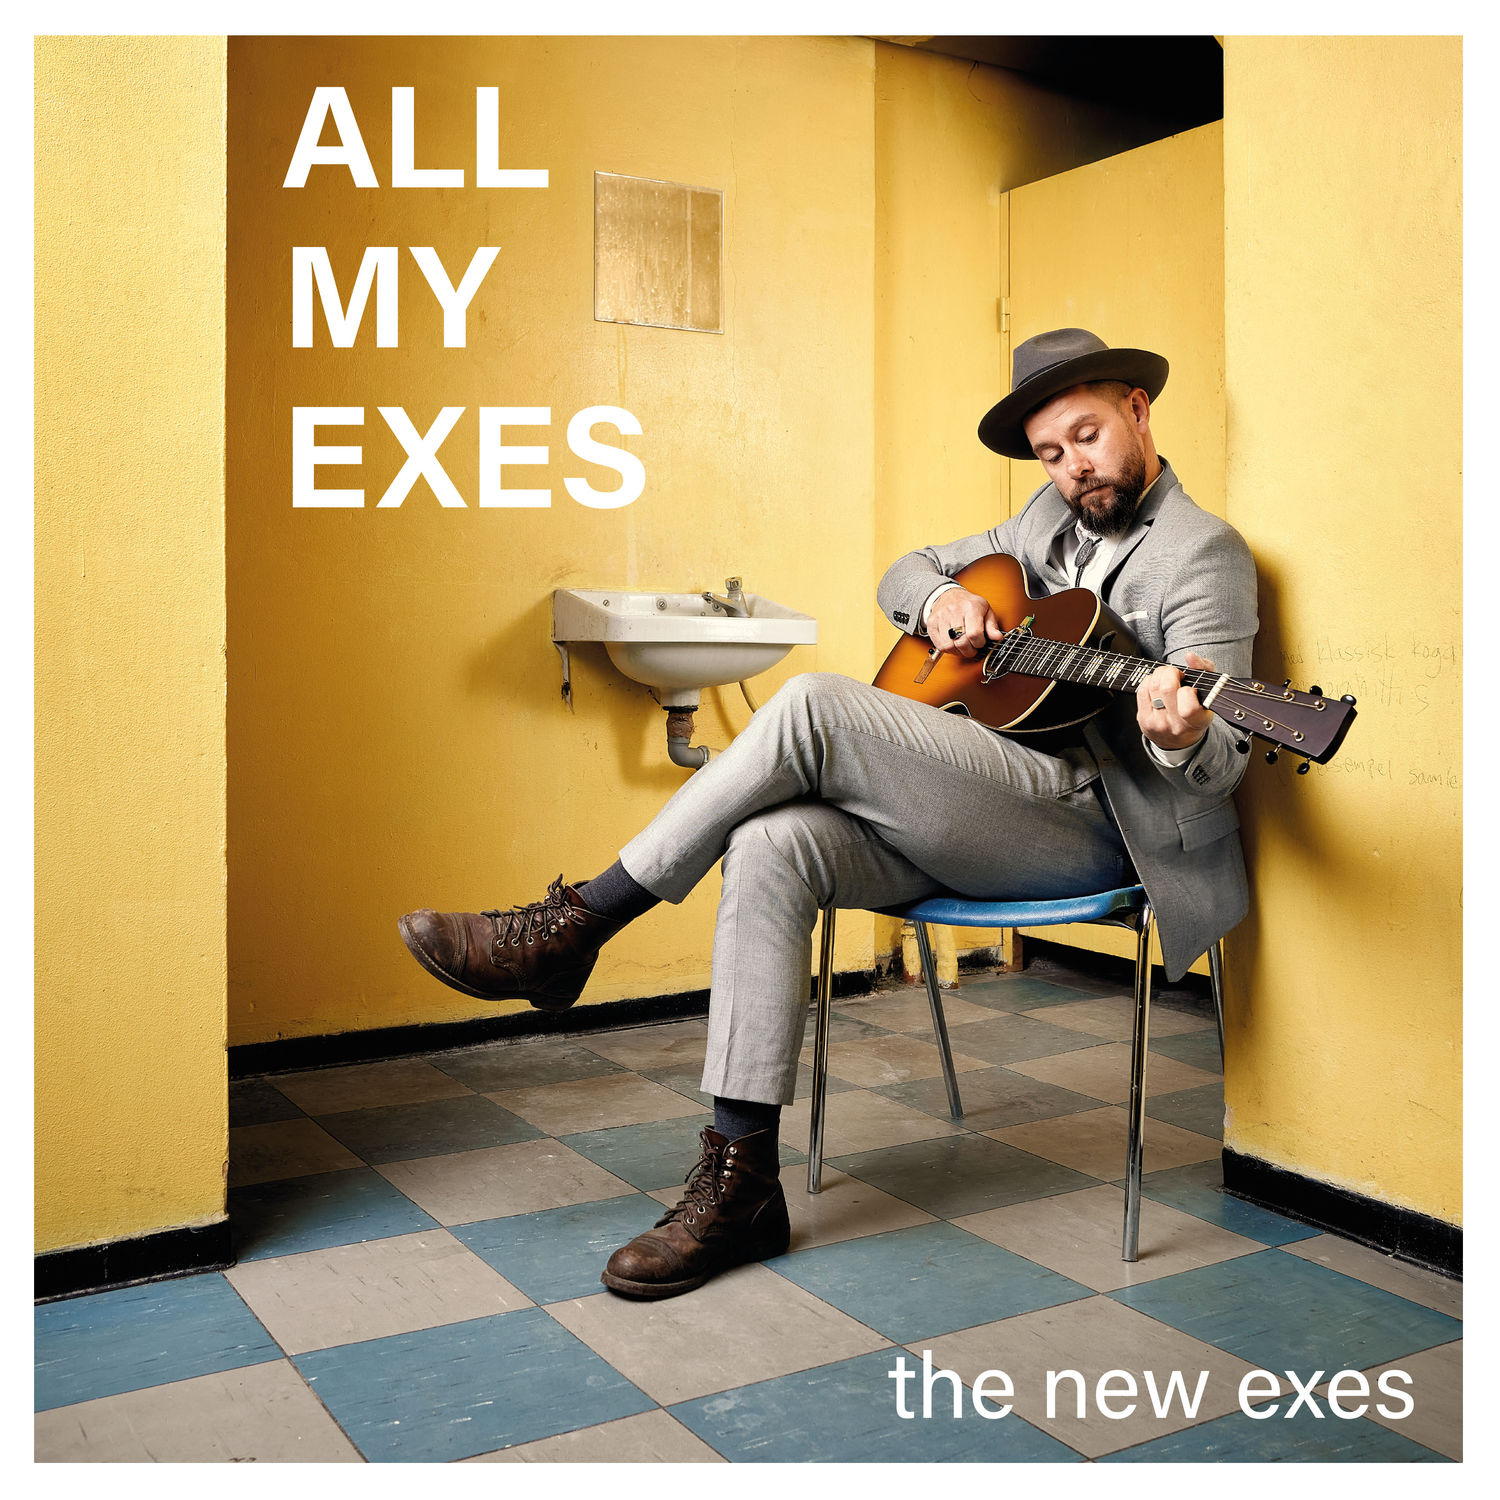 All My Exes - 2021 - The New Exes (24-88.2)